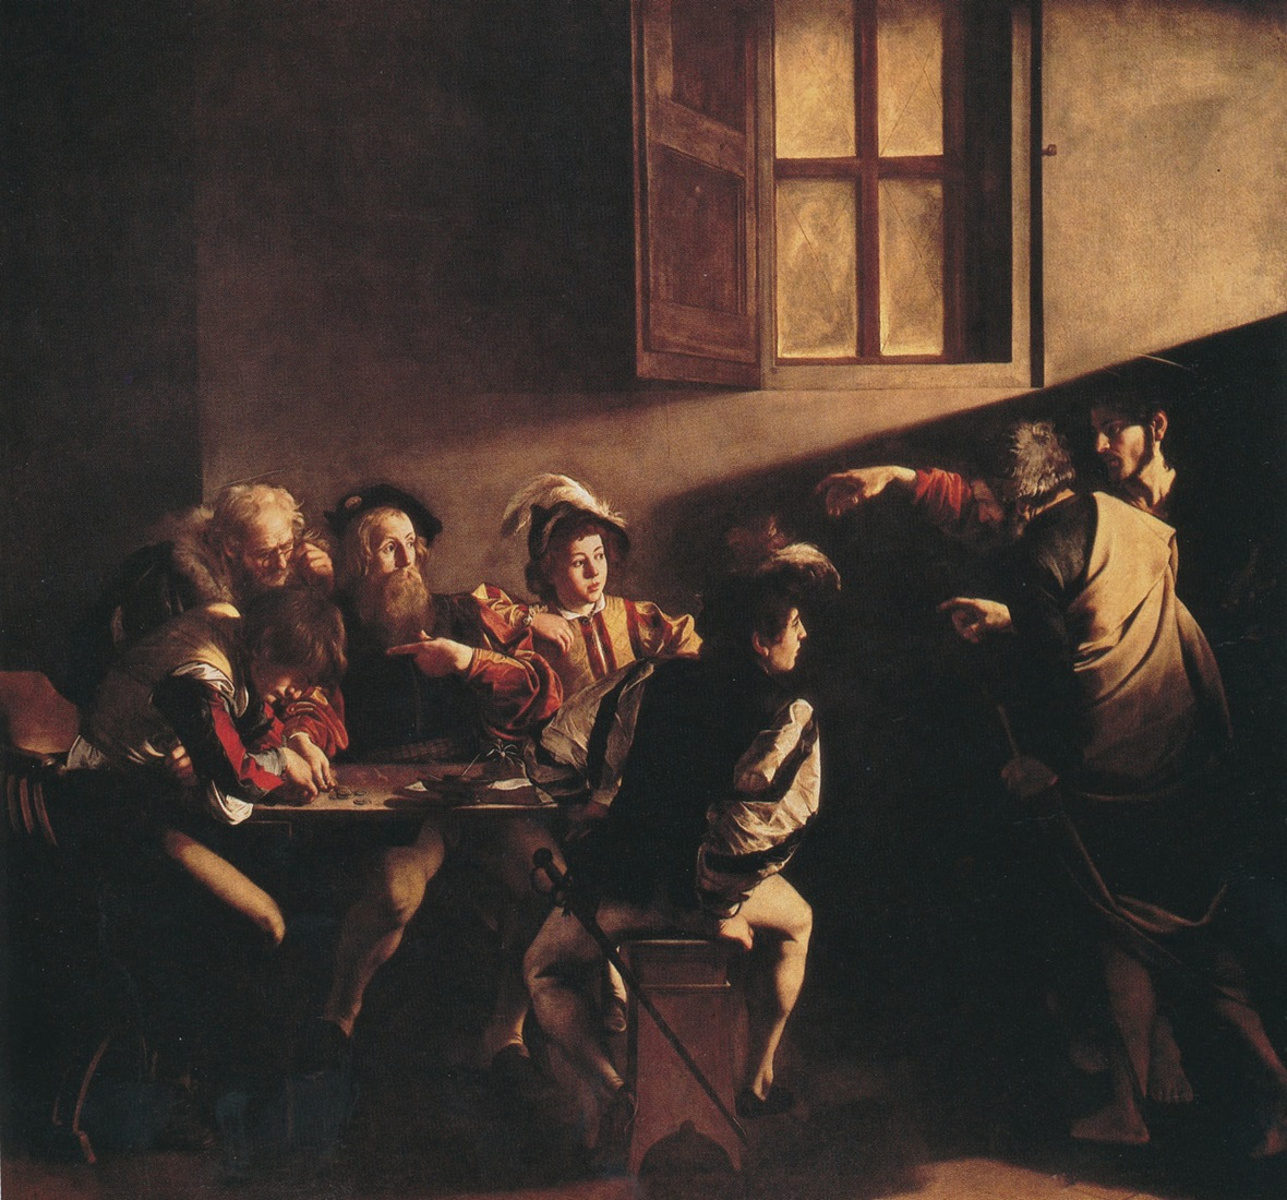   Caravaggio  The Calling of St Matthew, ca. 1600 Image: © owner 